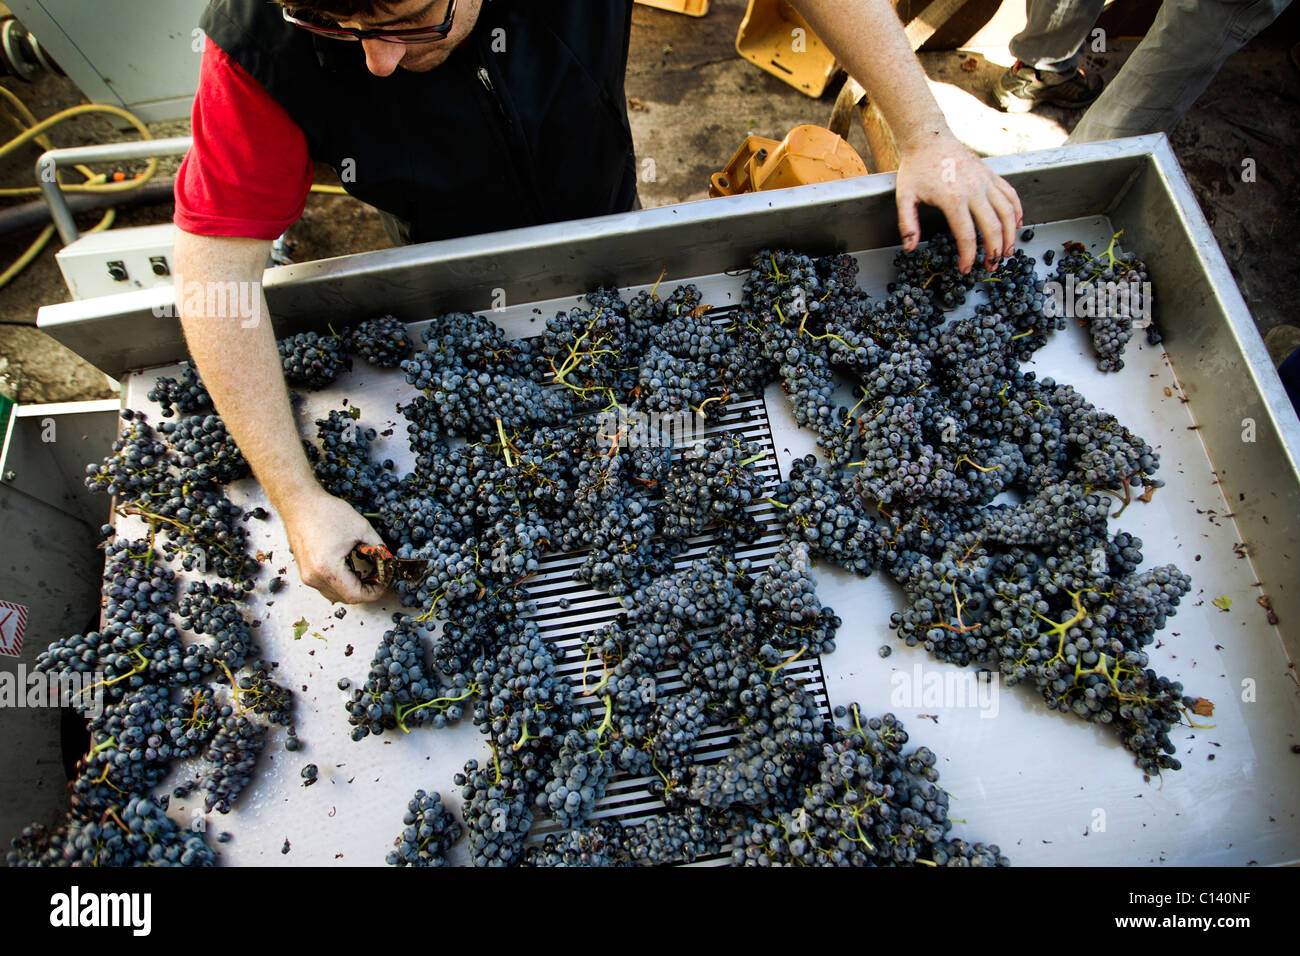 Man sorting through red grapes before they go into a de-stemming machine Stock Photo